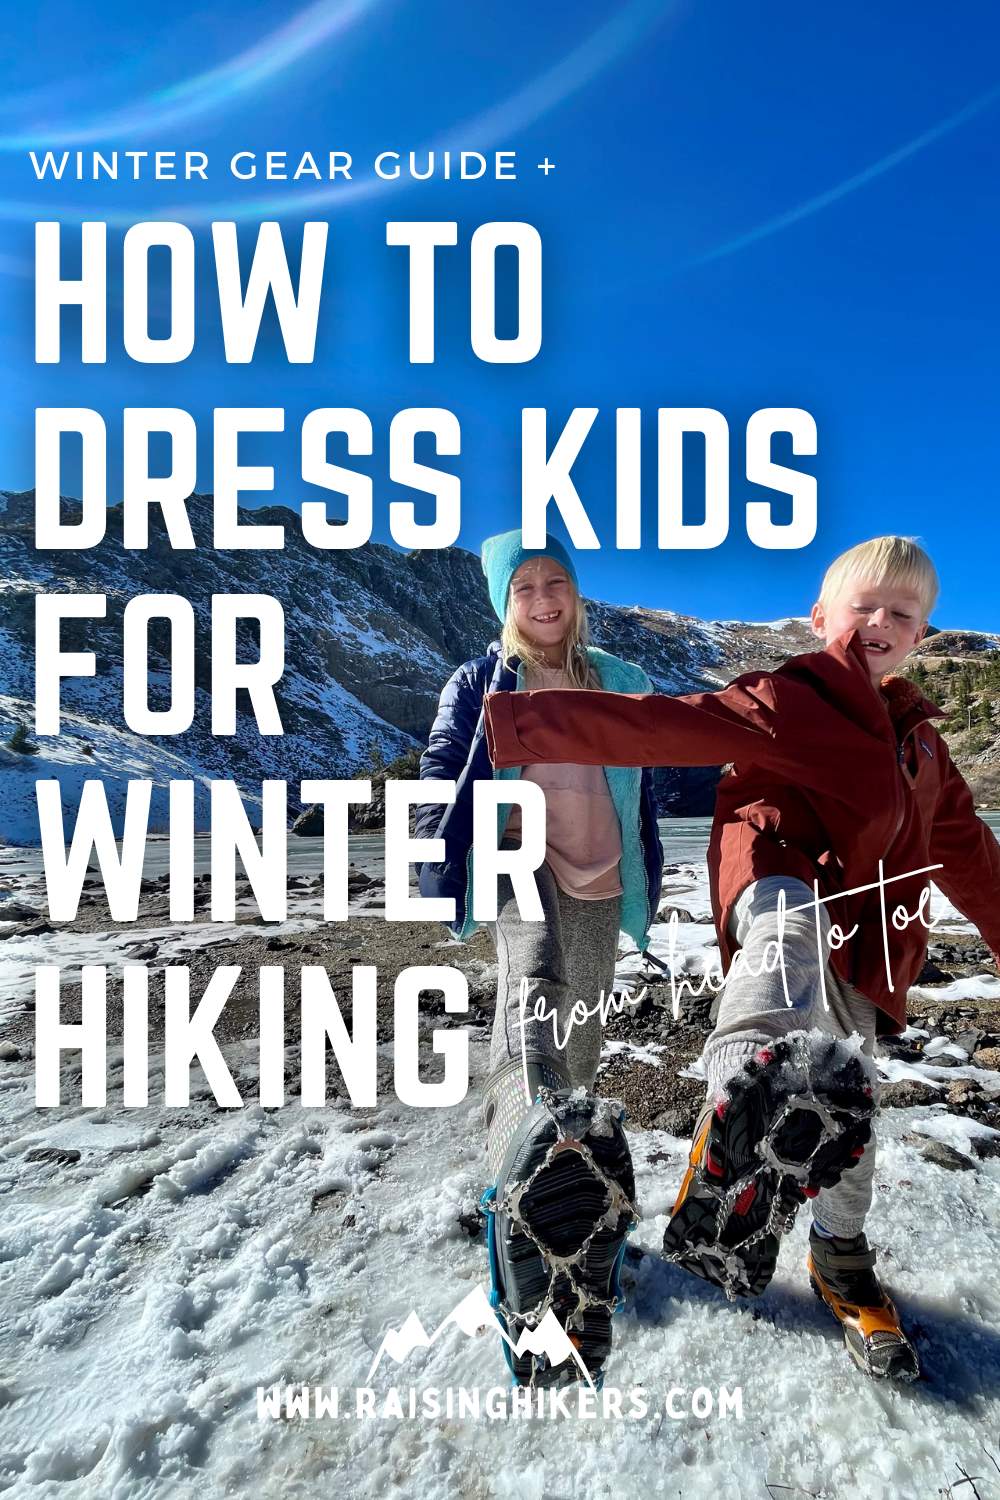 How to dress kids for winter hiking 